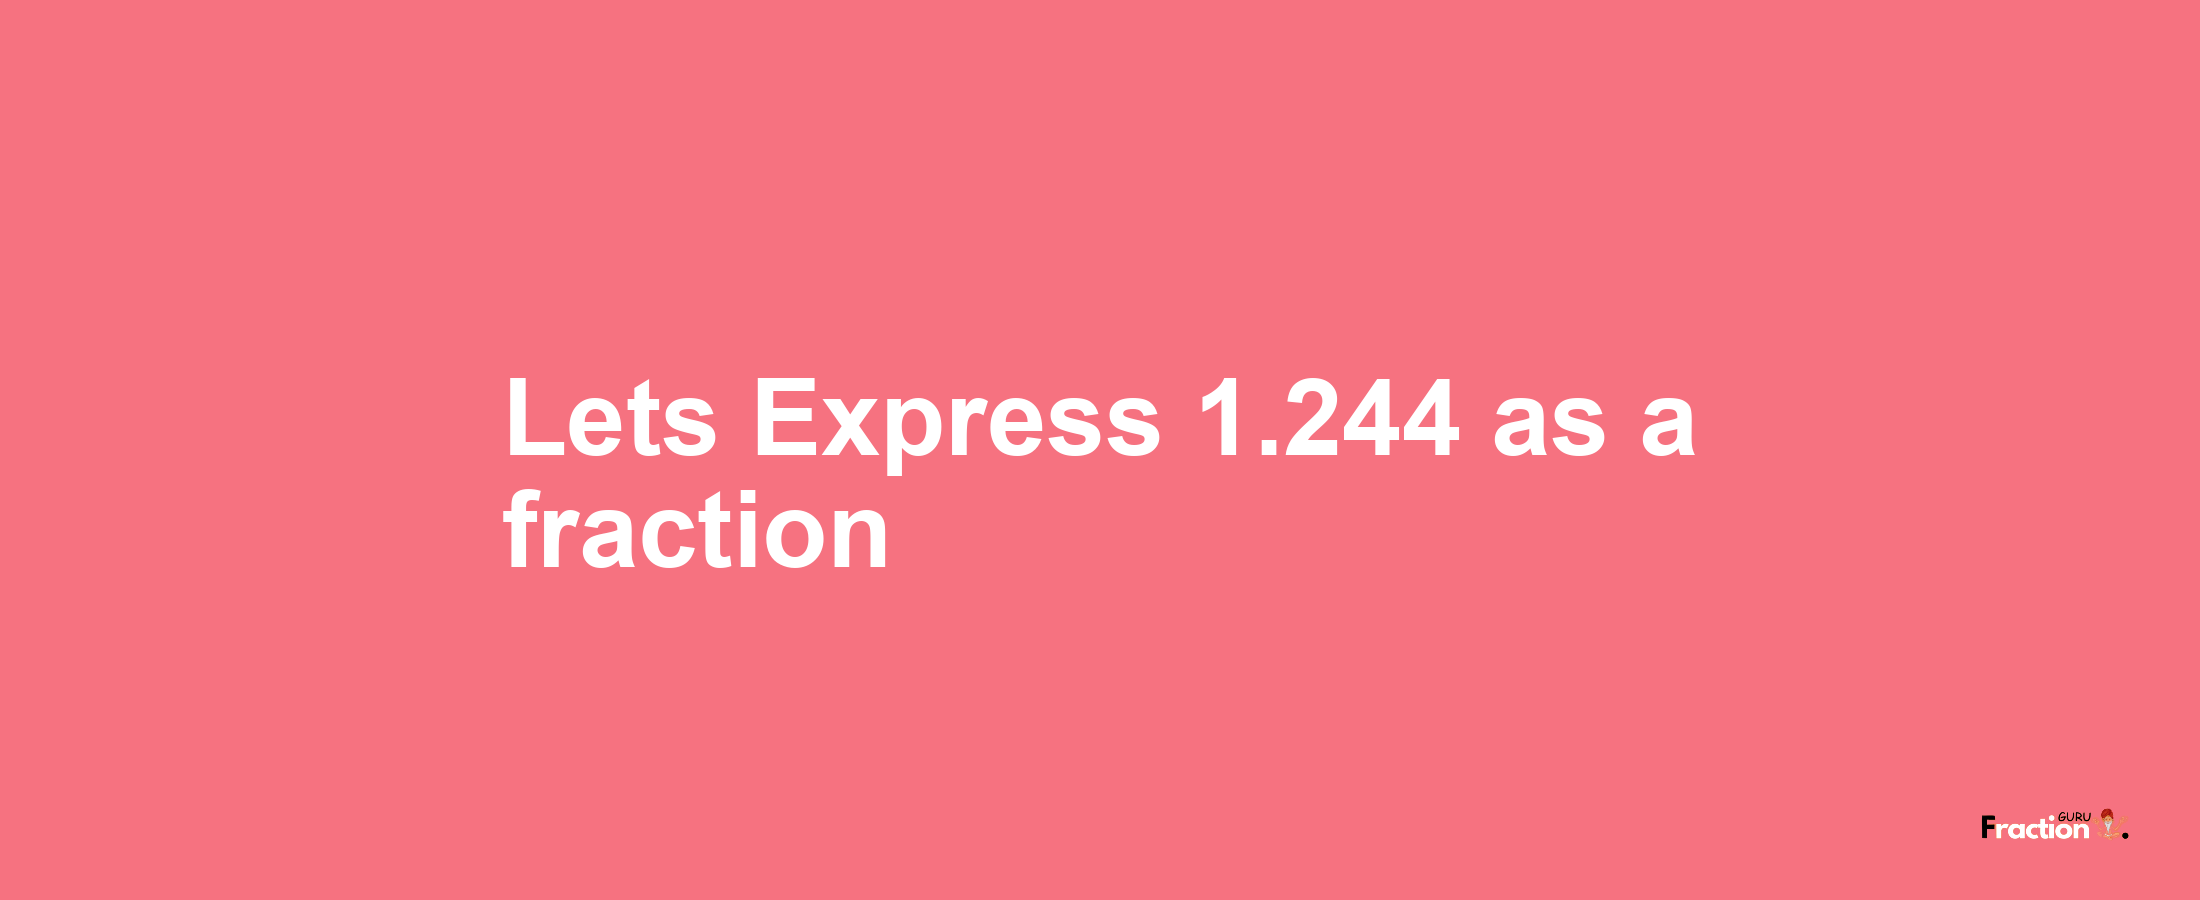 Lets Express 1.244 as afraction